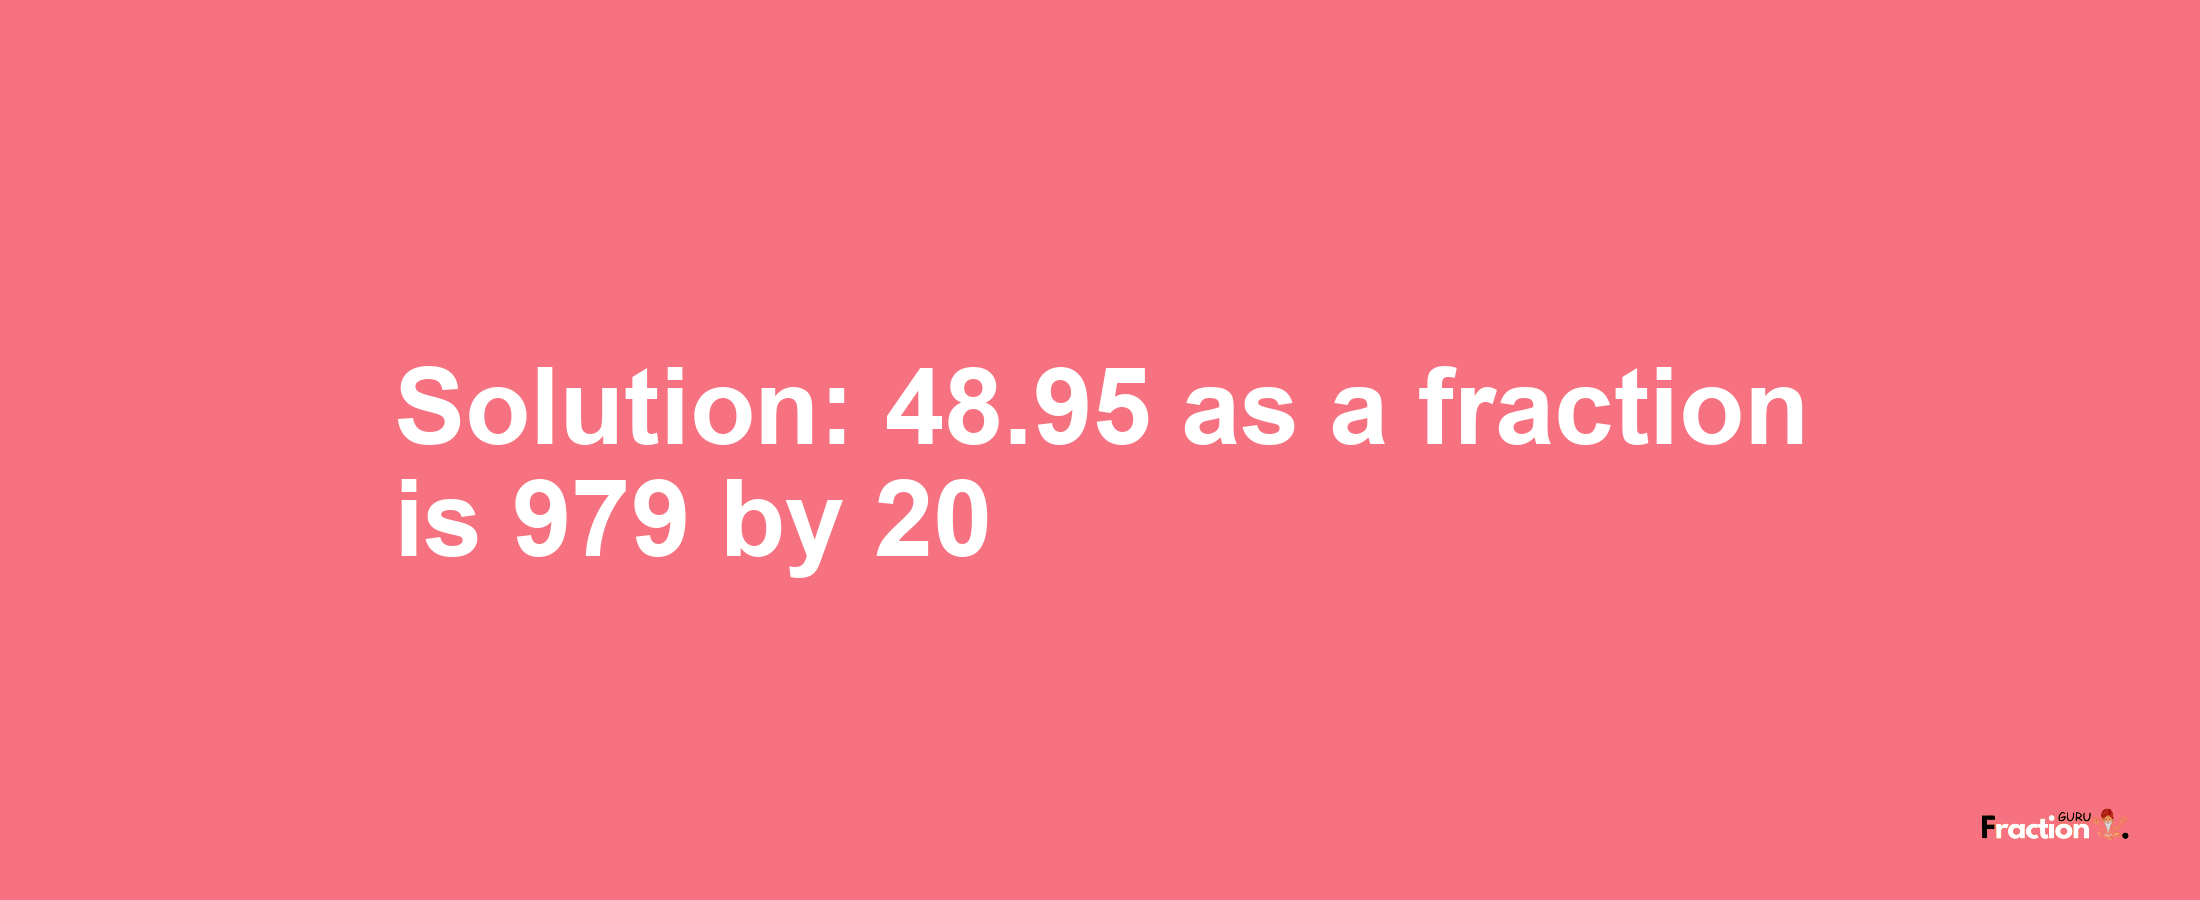 Solution:48.95 as a fraction is 979/20